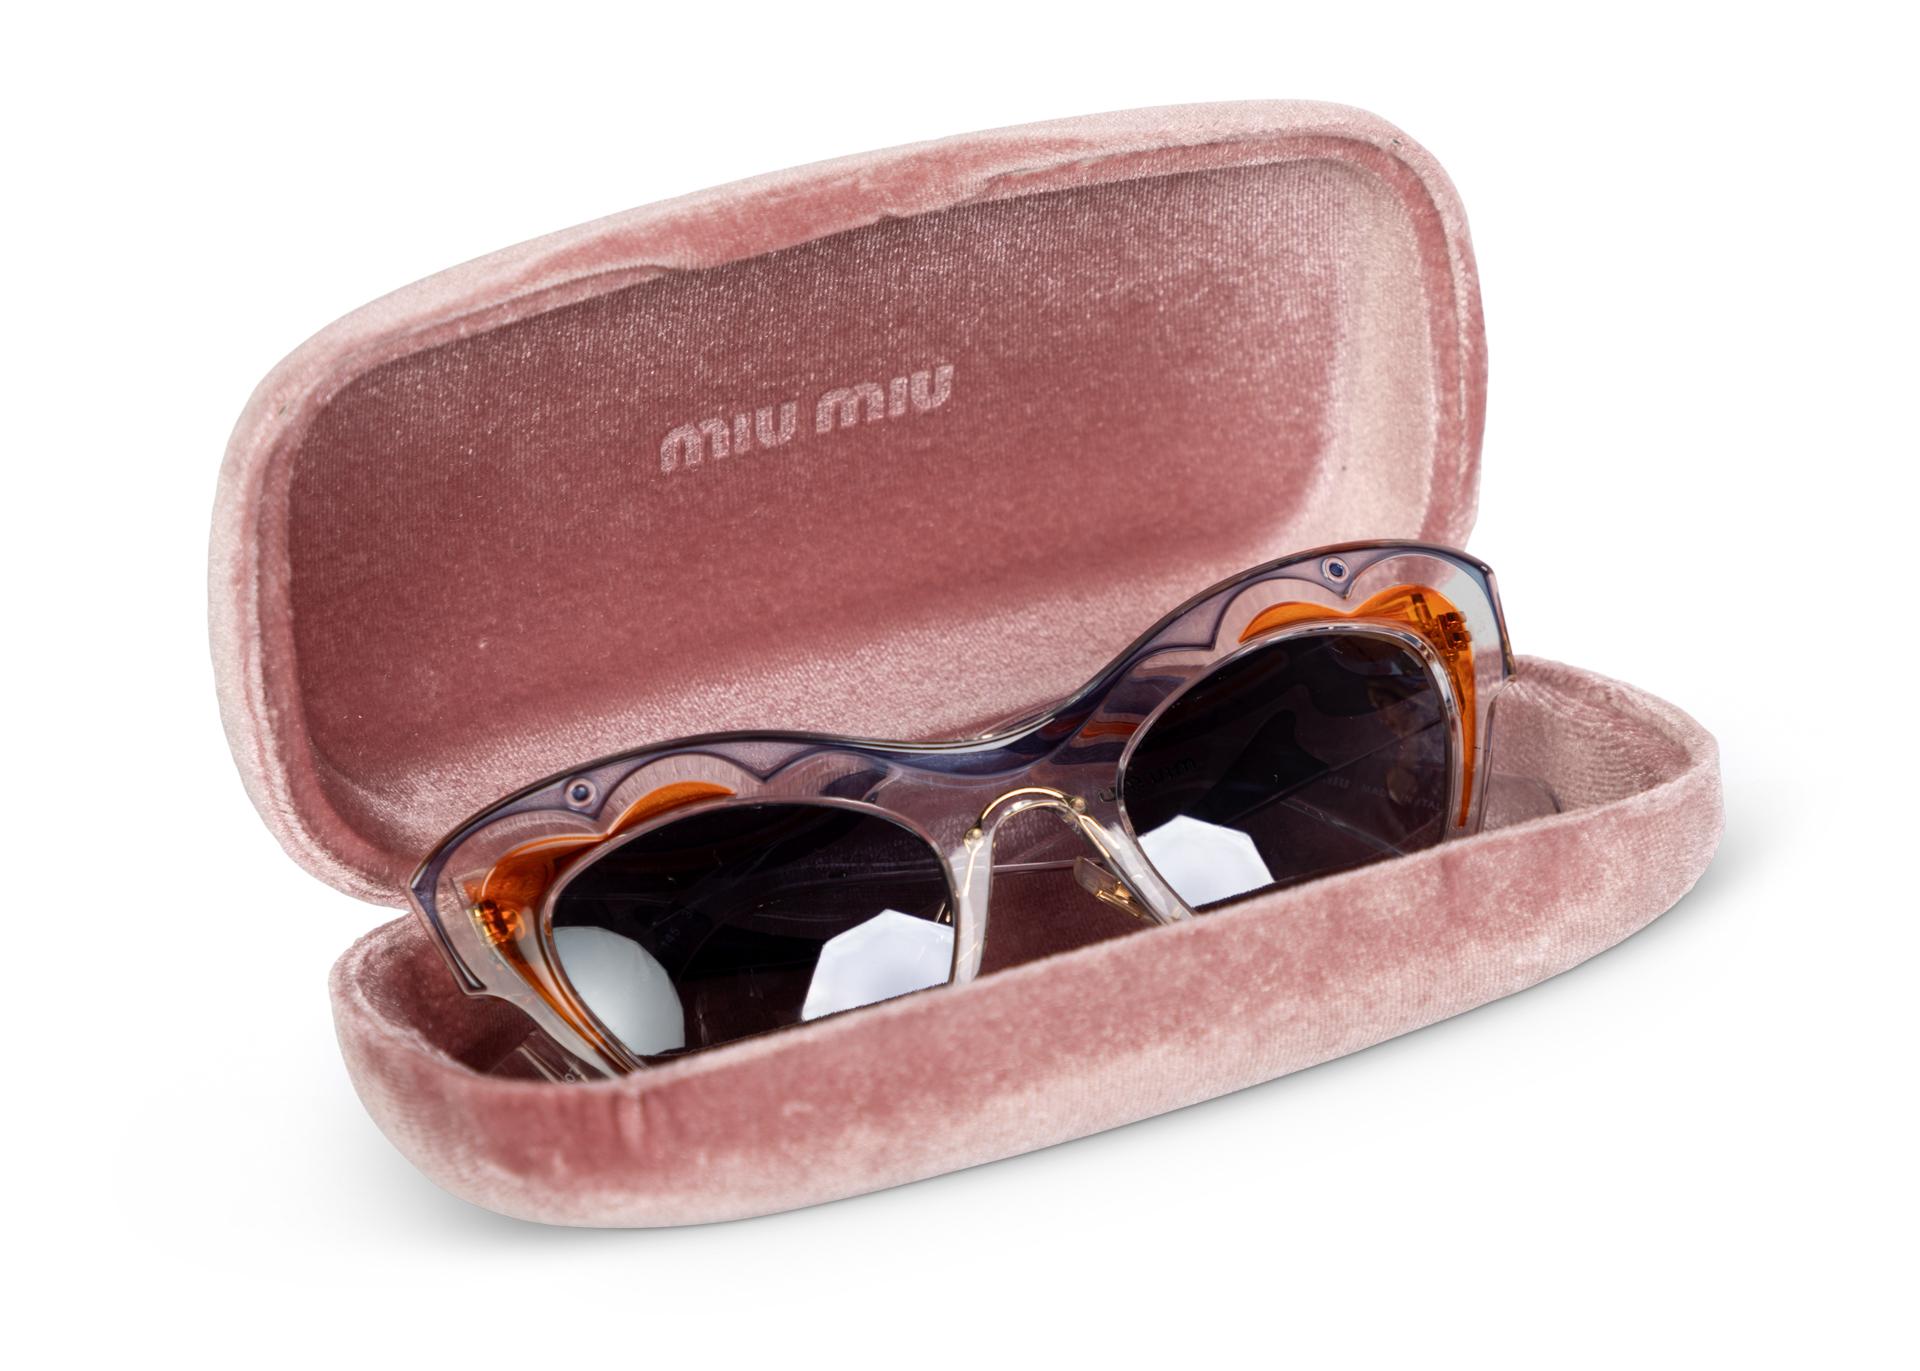 From the Spring 2014 , featured on the runway and that season's eyewear campaign modeled by Elle Fanning.
Transparent plastic sunglasses with blue and orange design. Gold tone logo at the temple and gradient lenses. Comes with case and dust cloth.